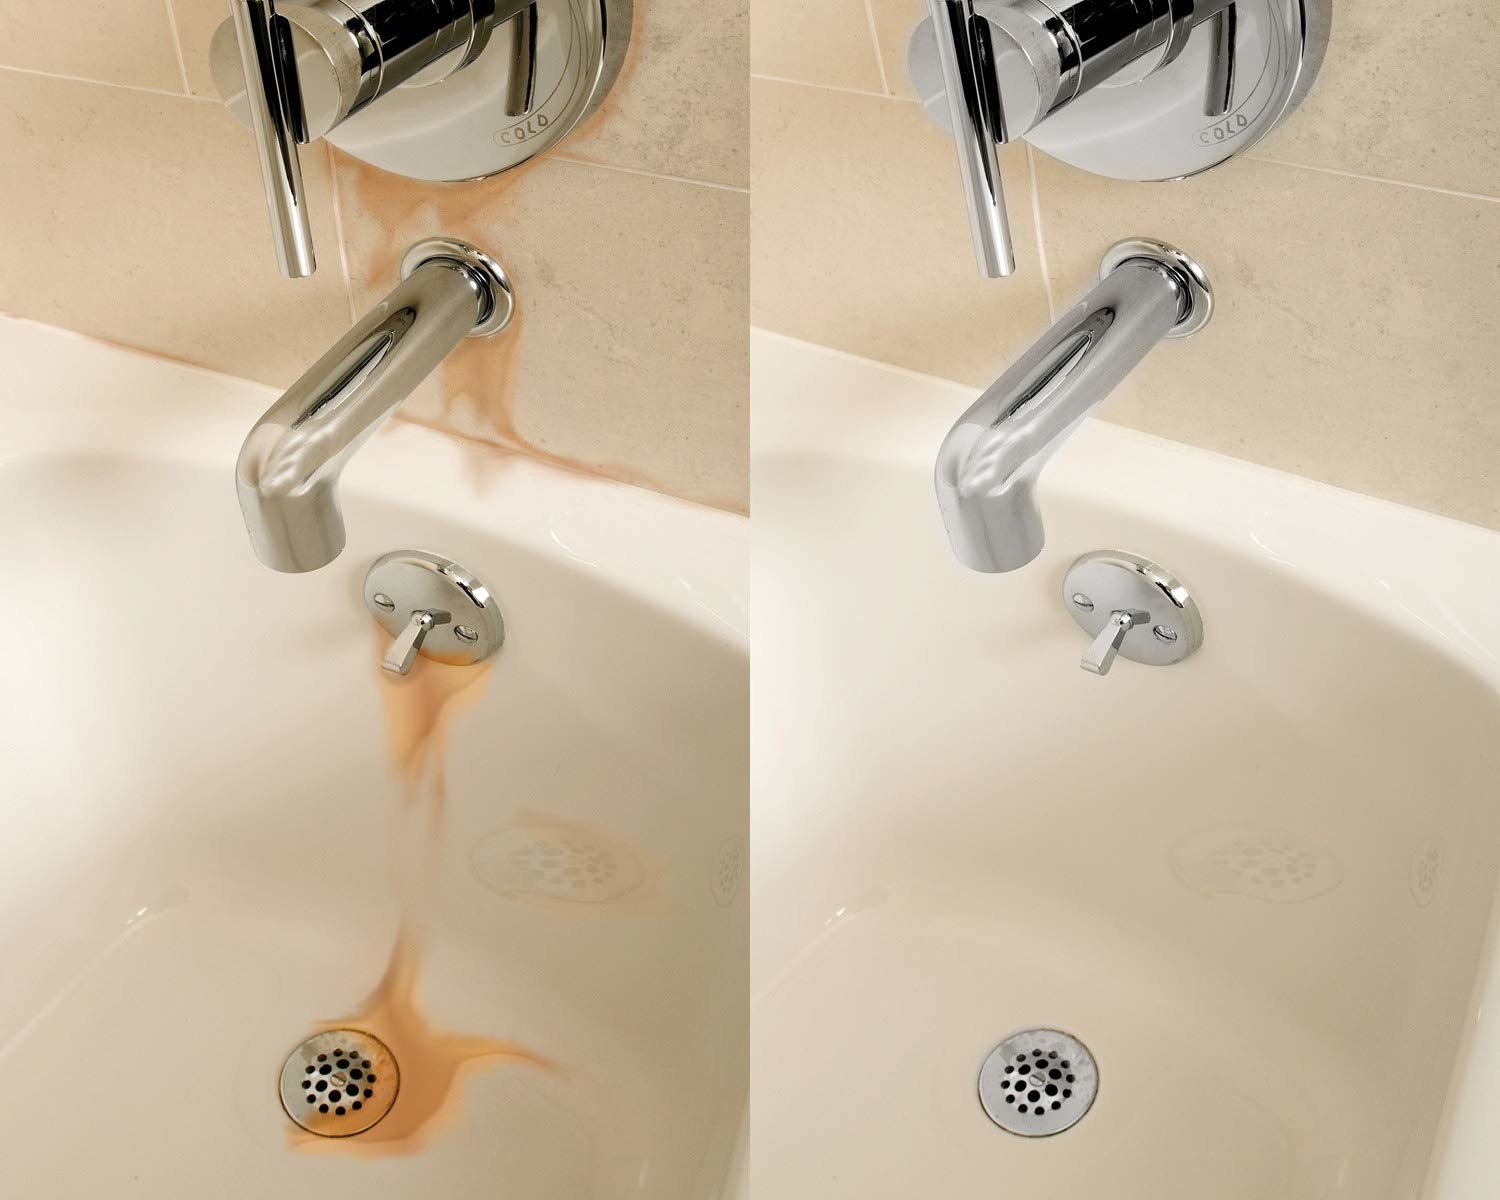 A before and after product photo showing a rust-stained tub and faucets, then those faucets clean and free of rust